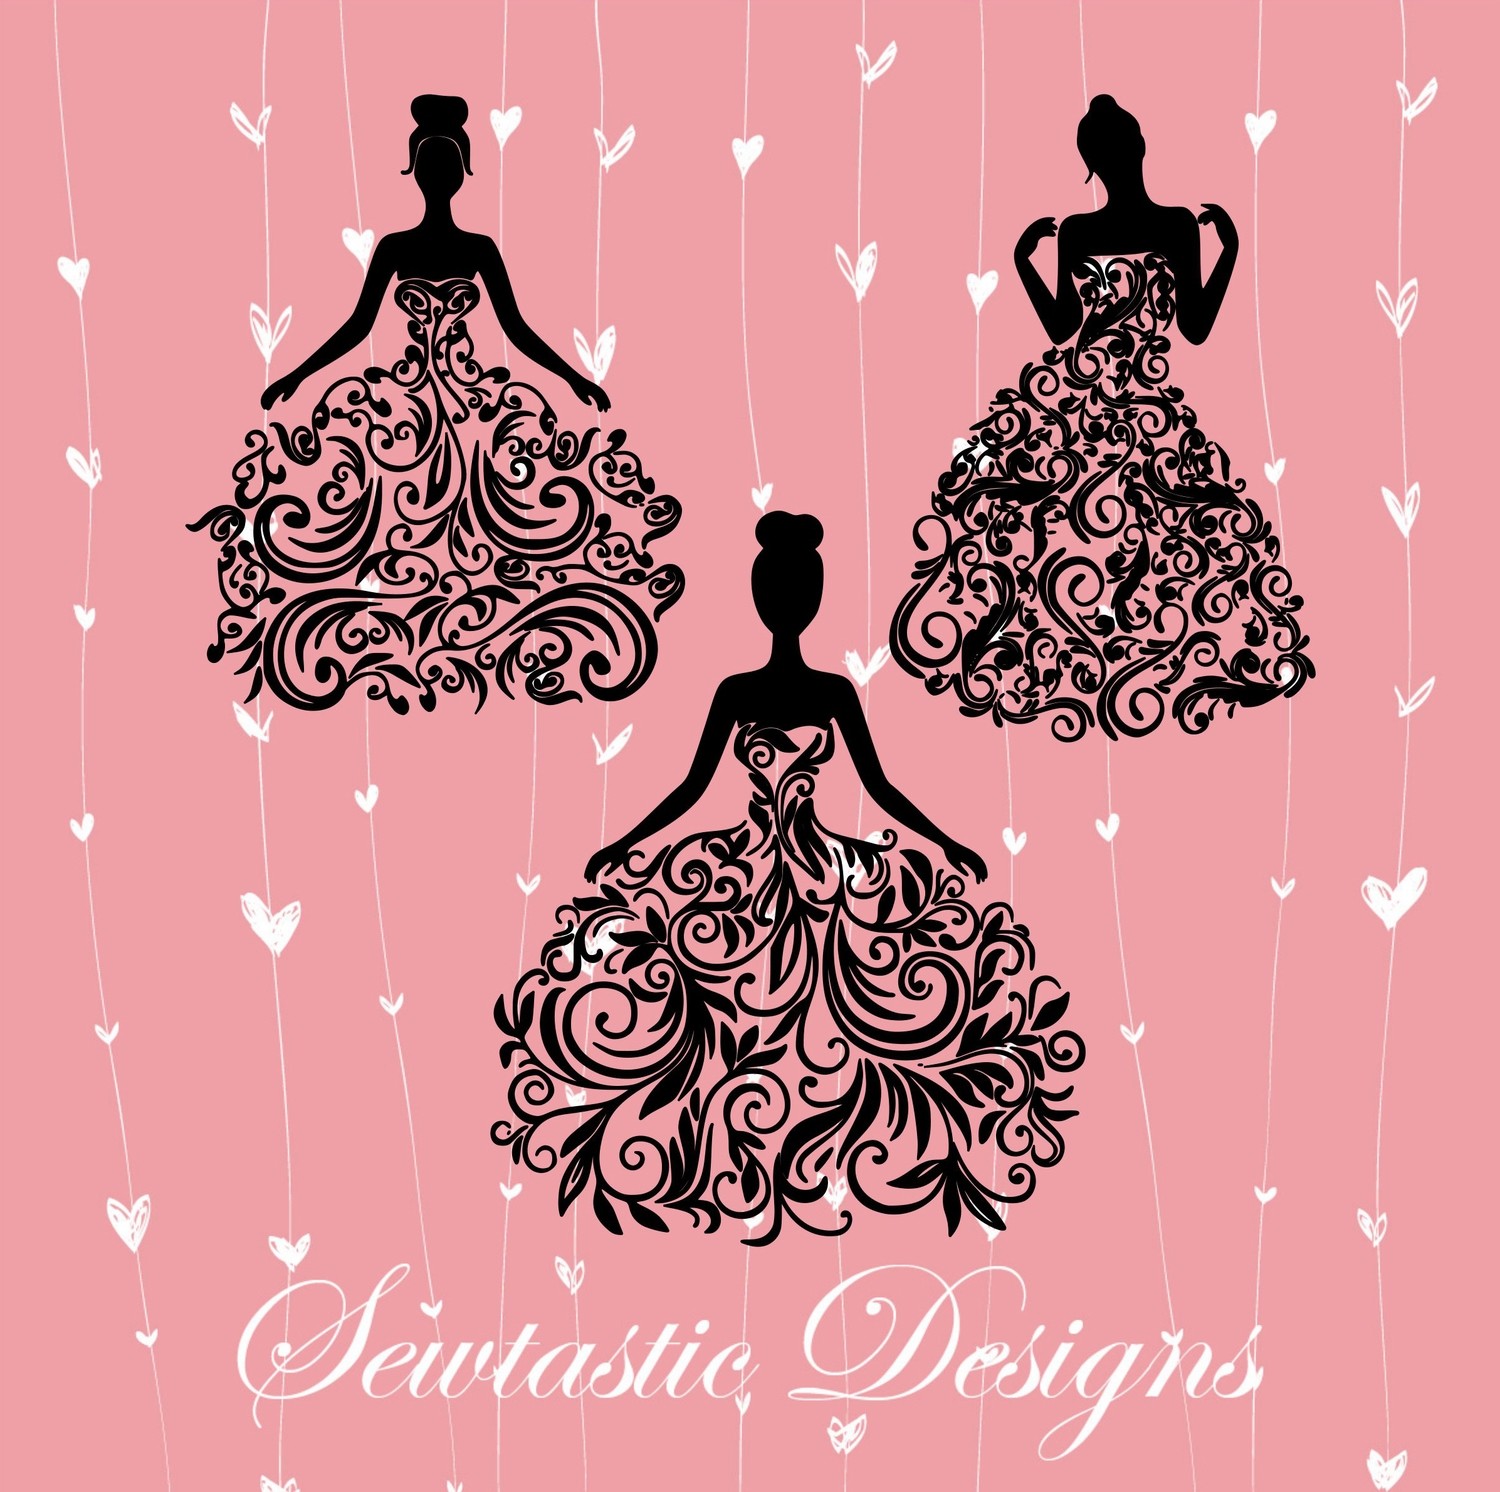 Download Bride SVG, Marriage SVG, Wedding SVG, Cut File, Iron On, Decal, Cricut, Silhouette, ScanNCut ...